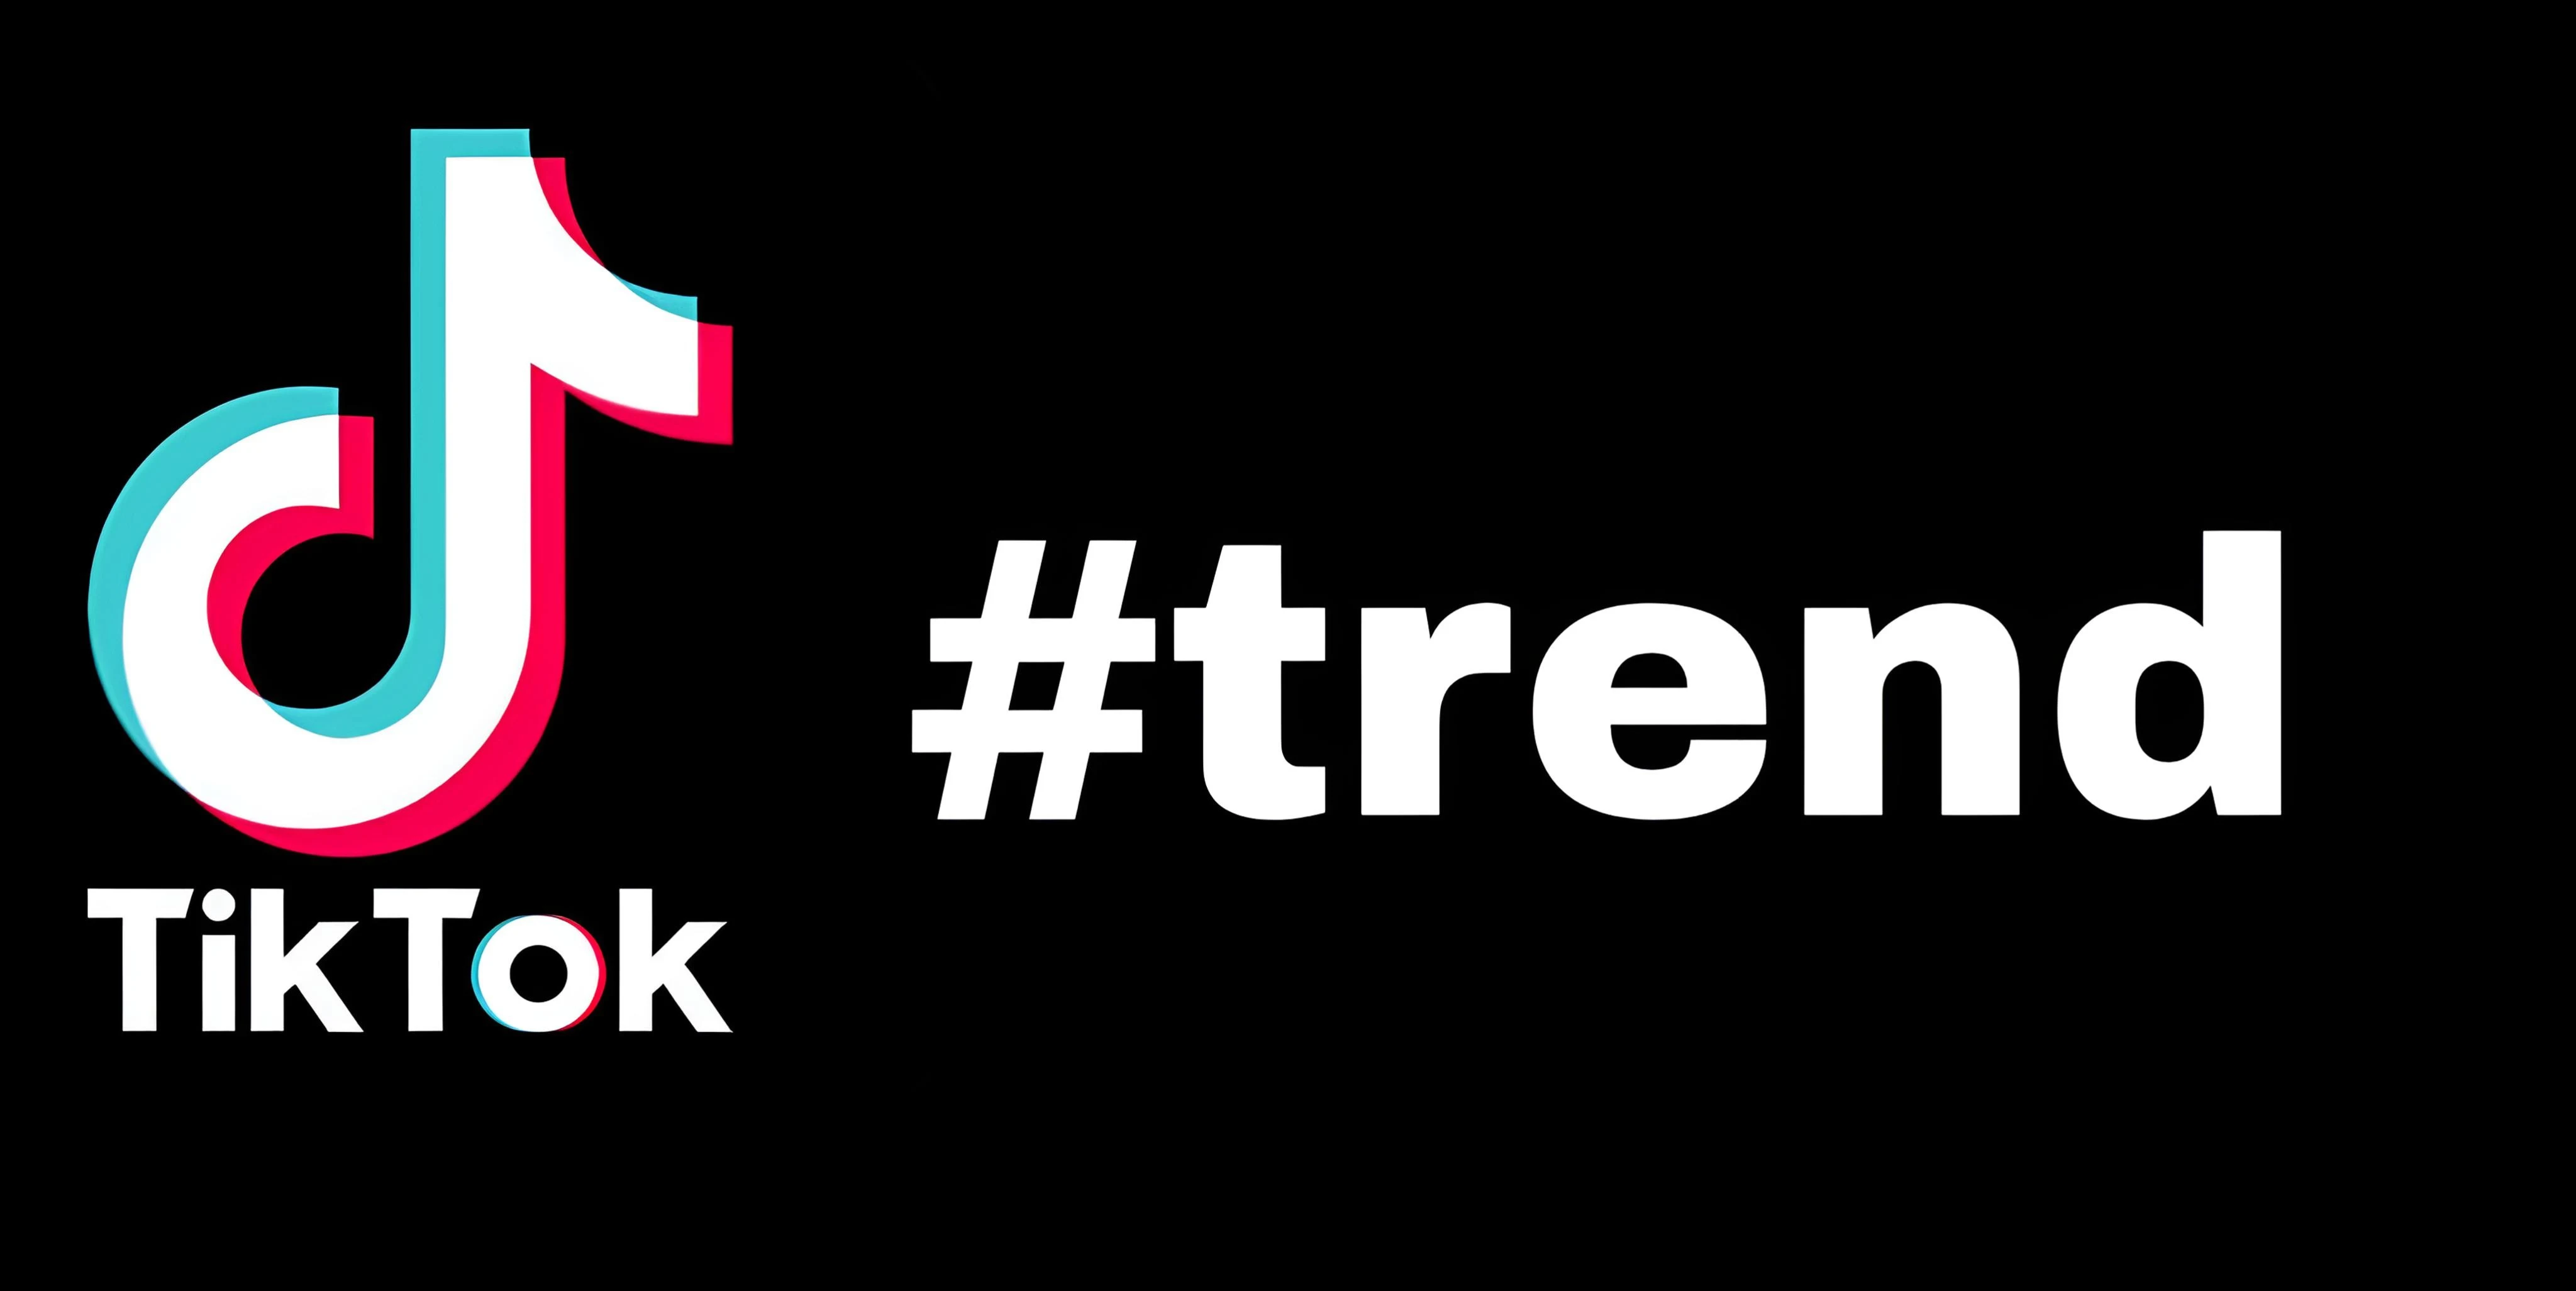 How to know the most trending hashtags on TikTok through these tools